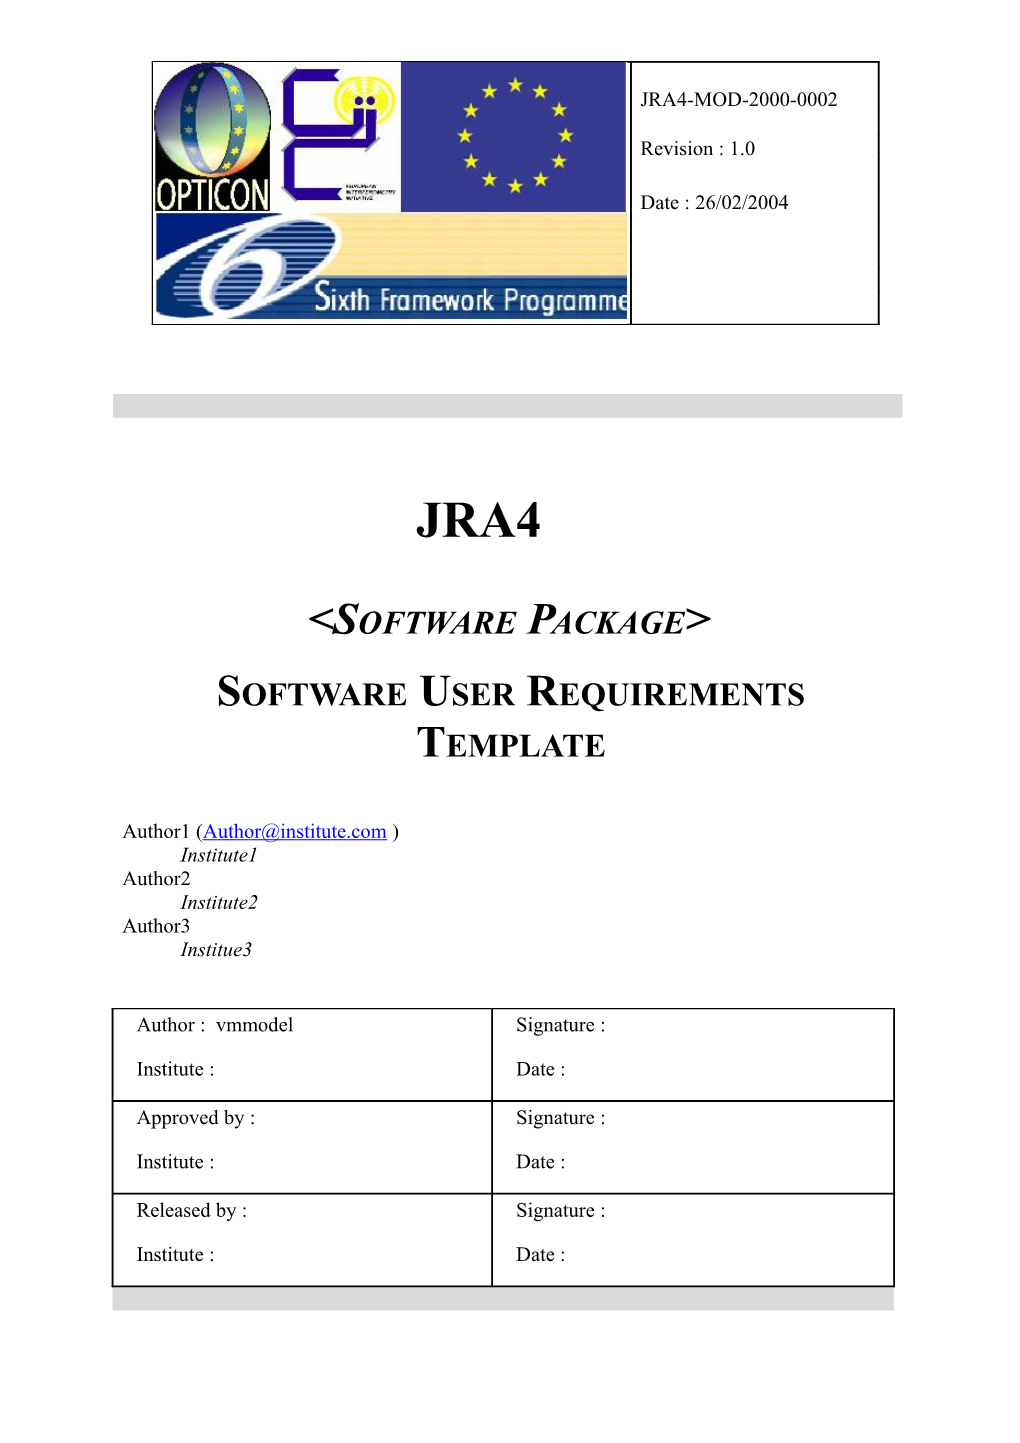 Software User Requirements Template